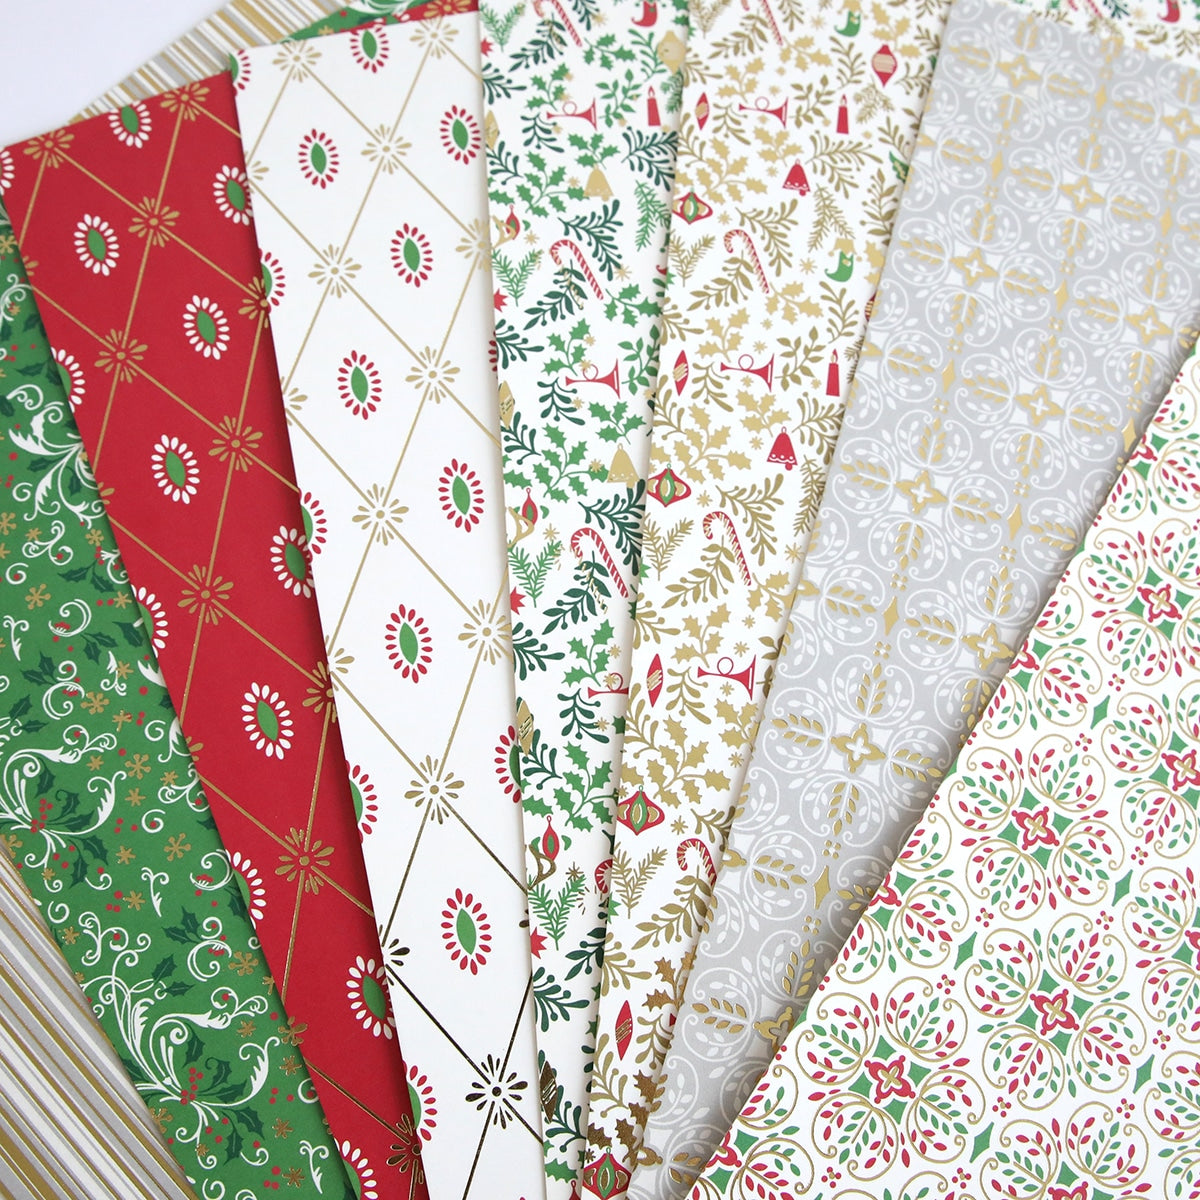 A stack of Christmas 12x12 Cardstock with red, green, and gold designs.